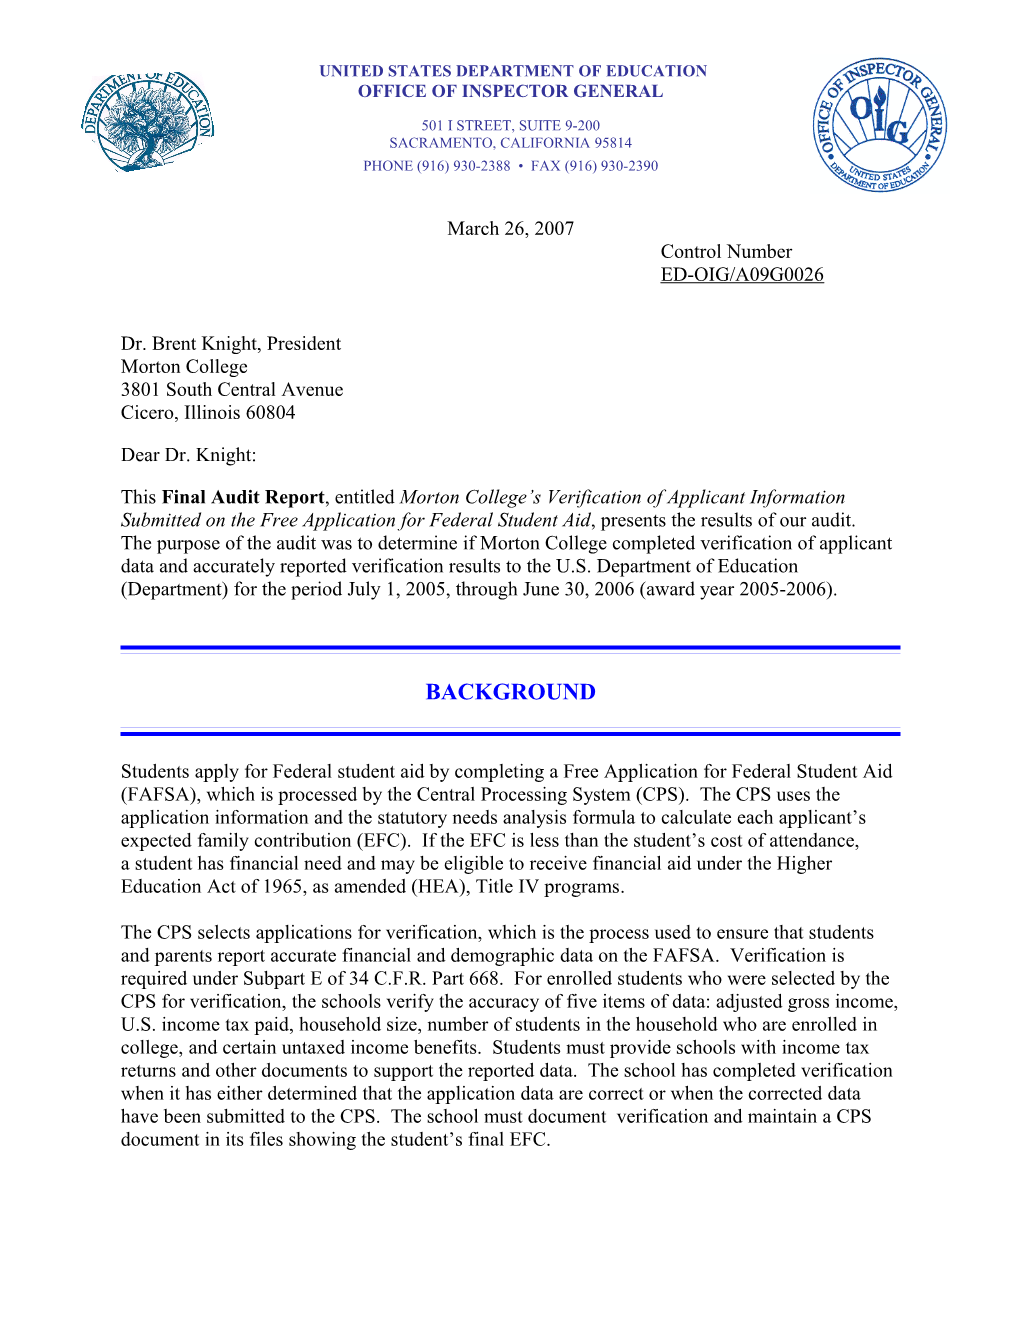 OIG Audit Report: Morton College's Verification of Applicant Information Submitted on The